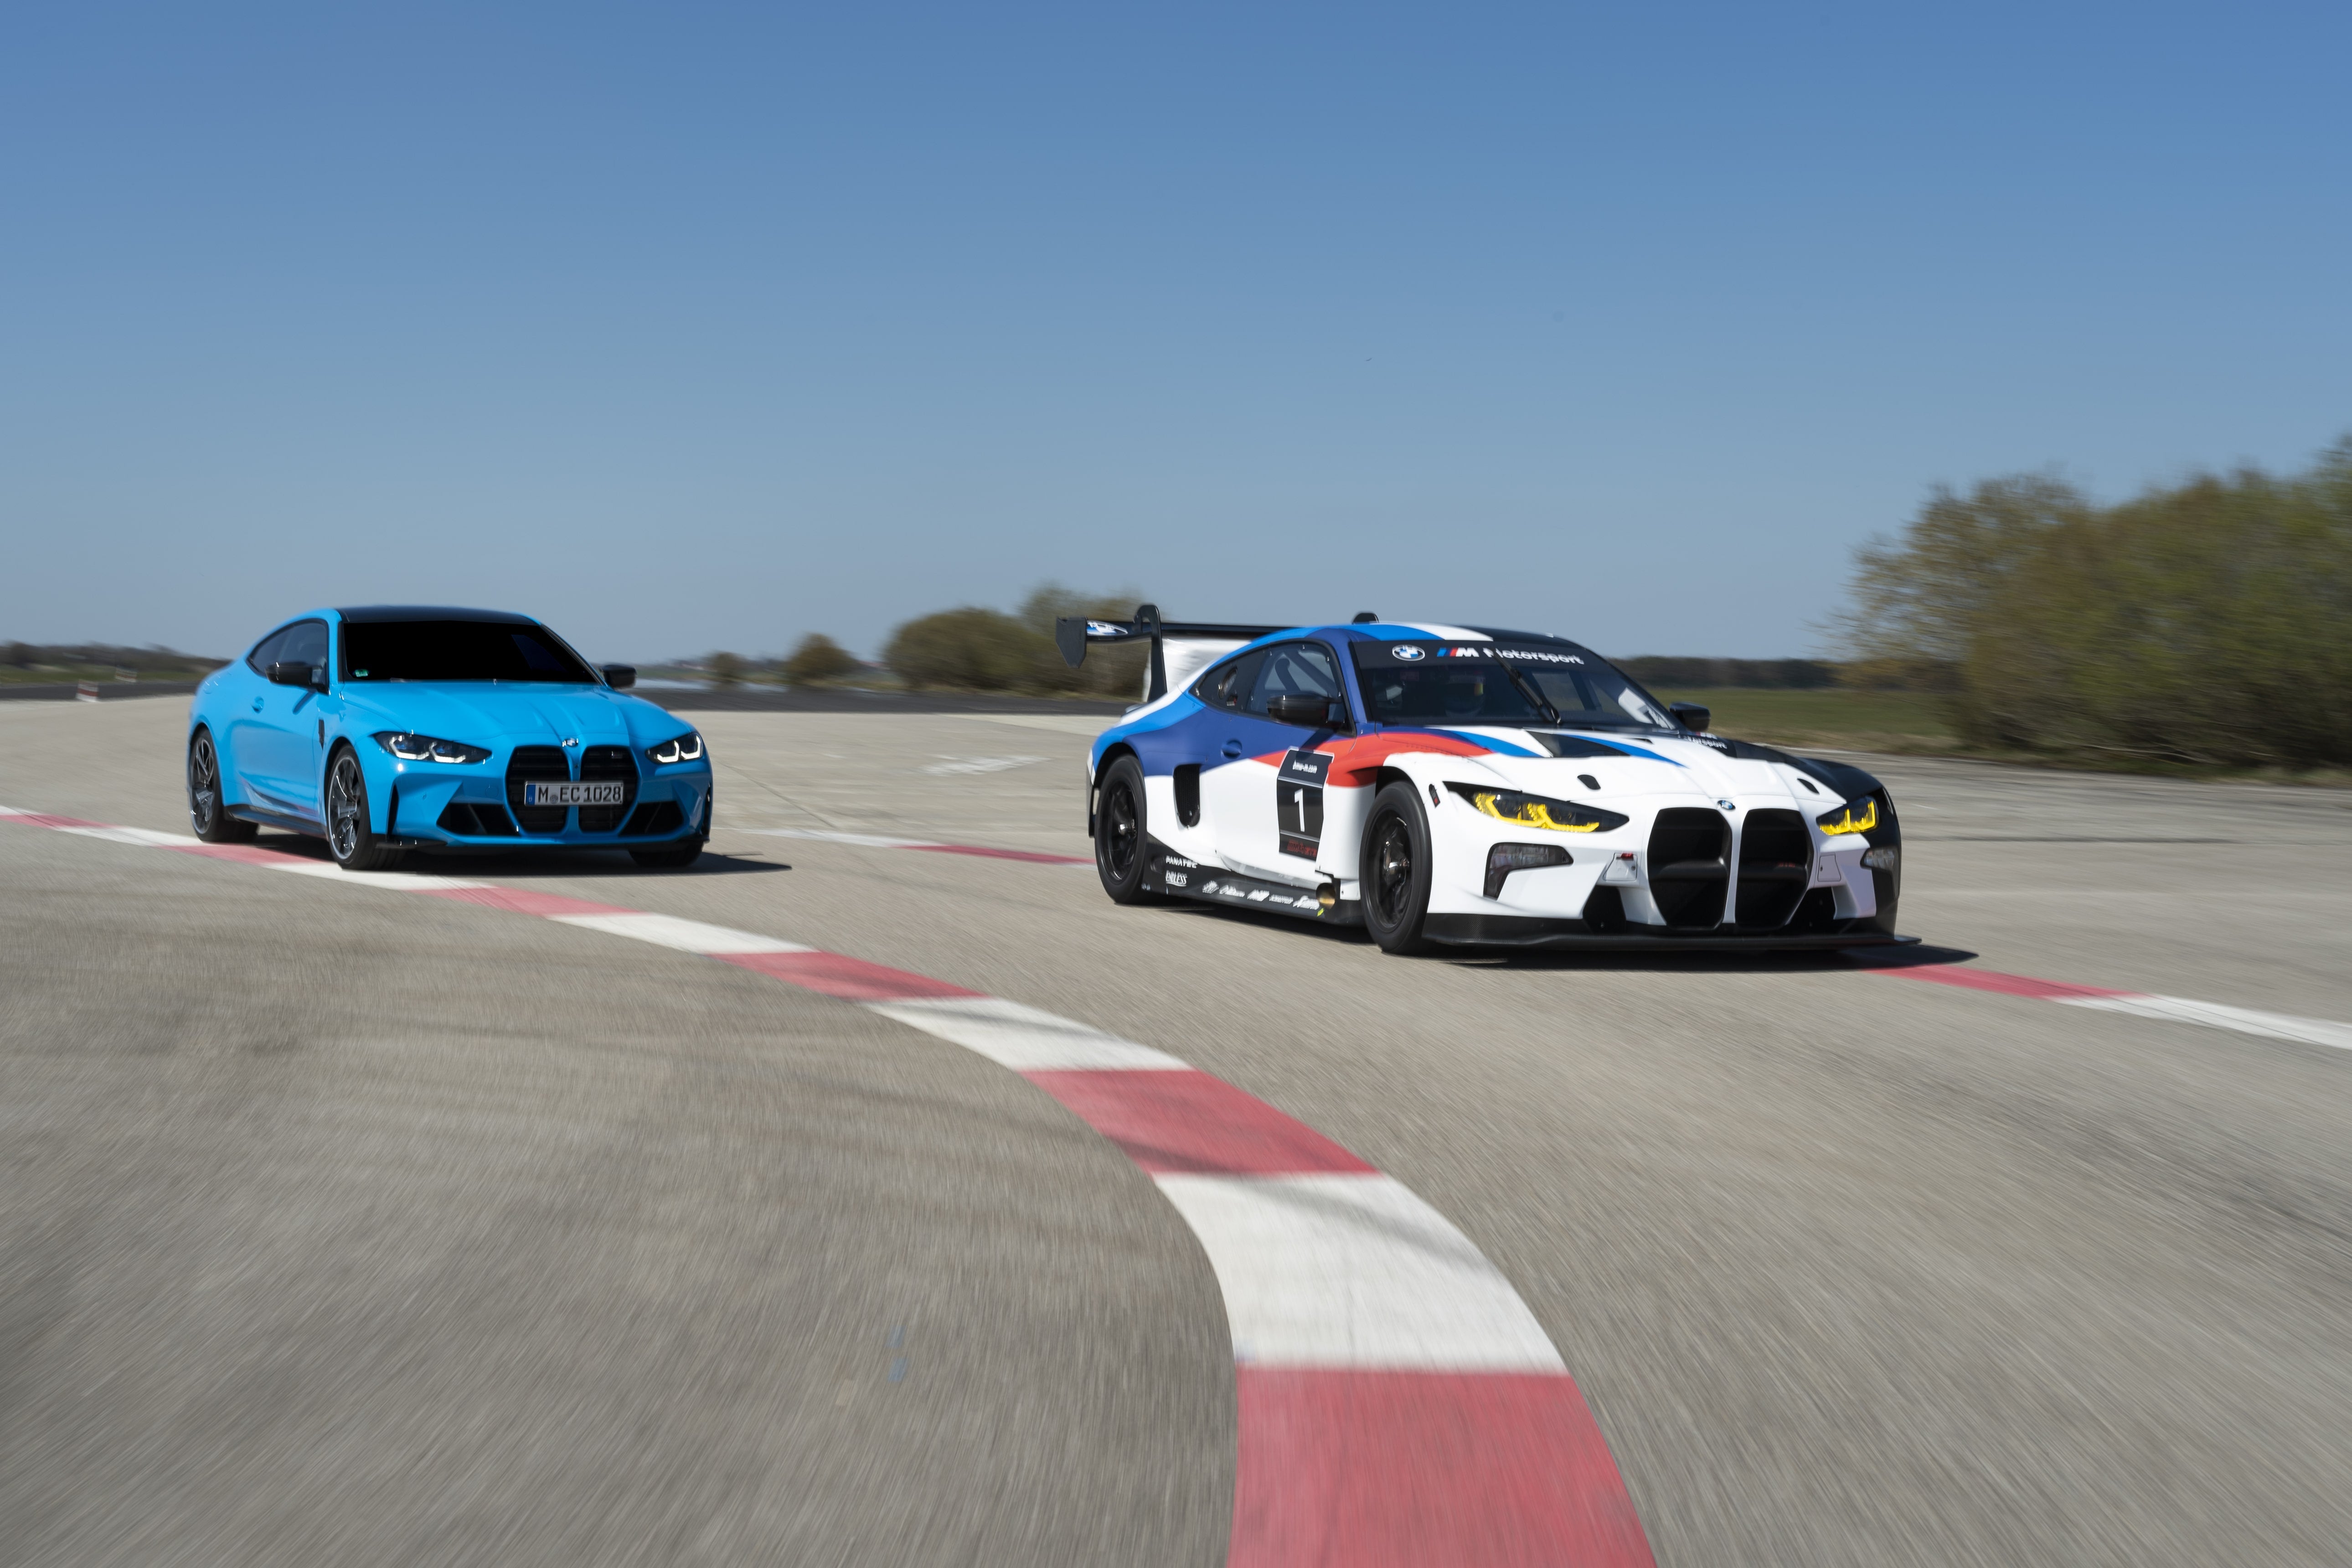 A Light Blue BMW Sedan on the Racing Track with a souped-up BMW